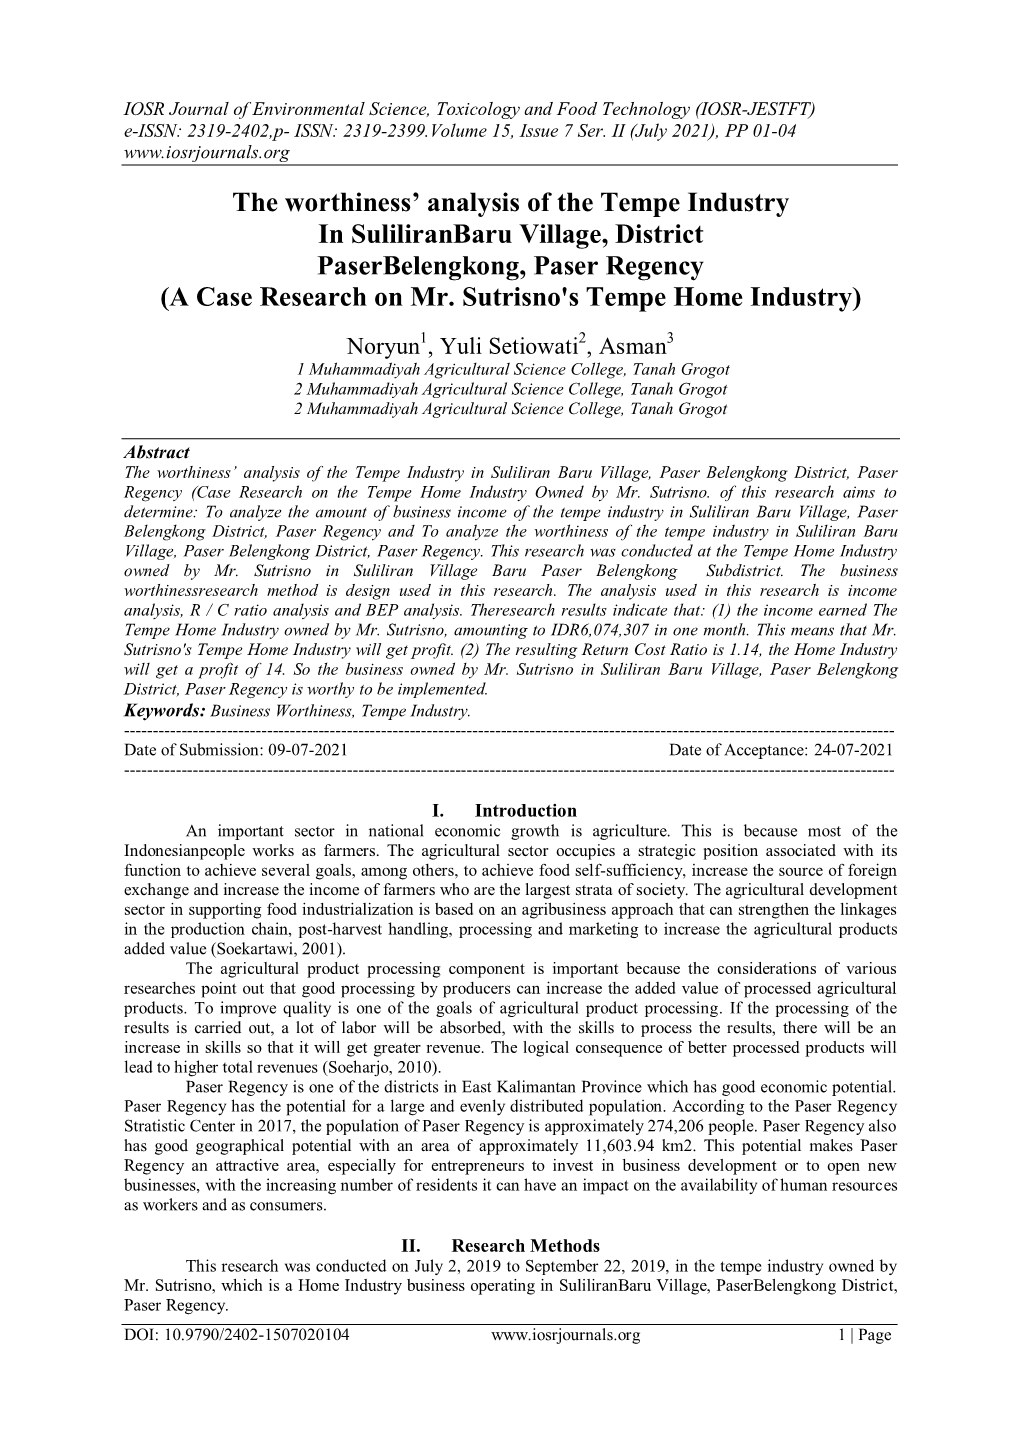 The Worthiness' Analysis of the Tempe Industry in Suliliranbaru Village, District Paserbelengkong, Paser Regency